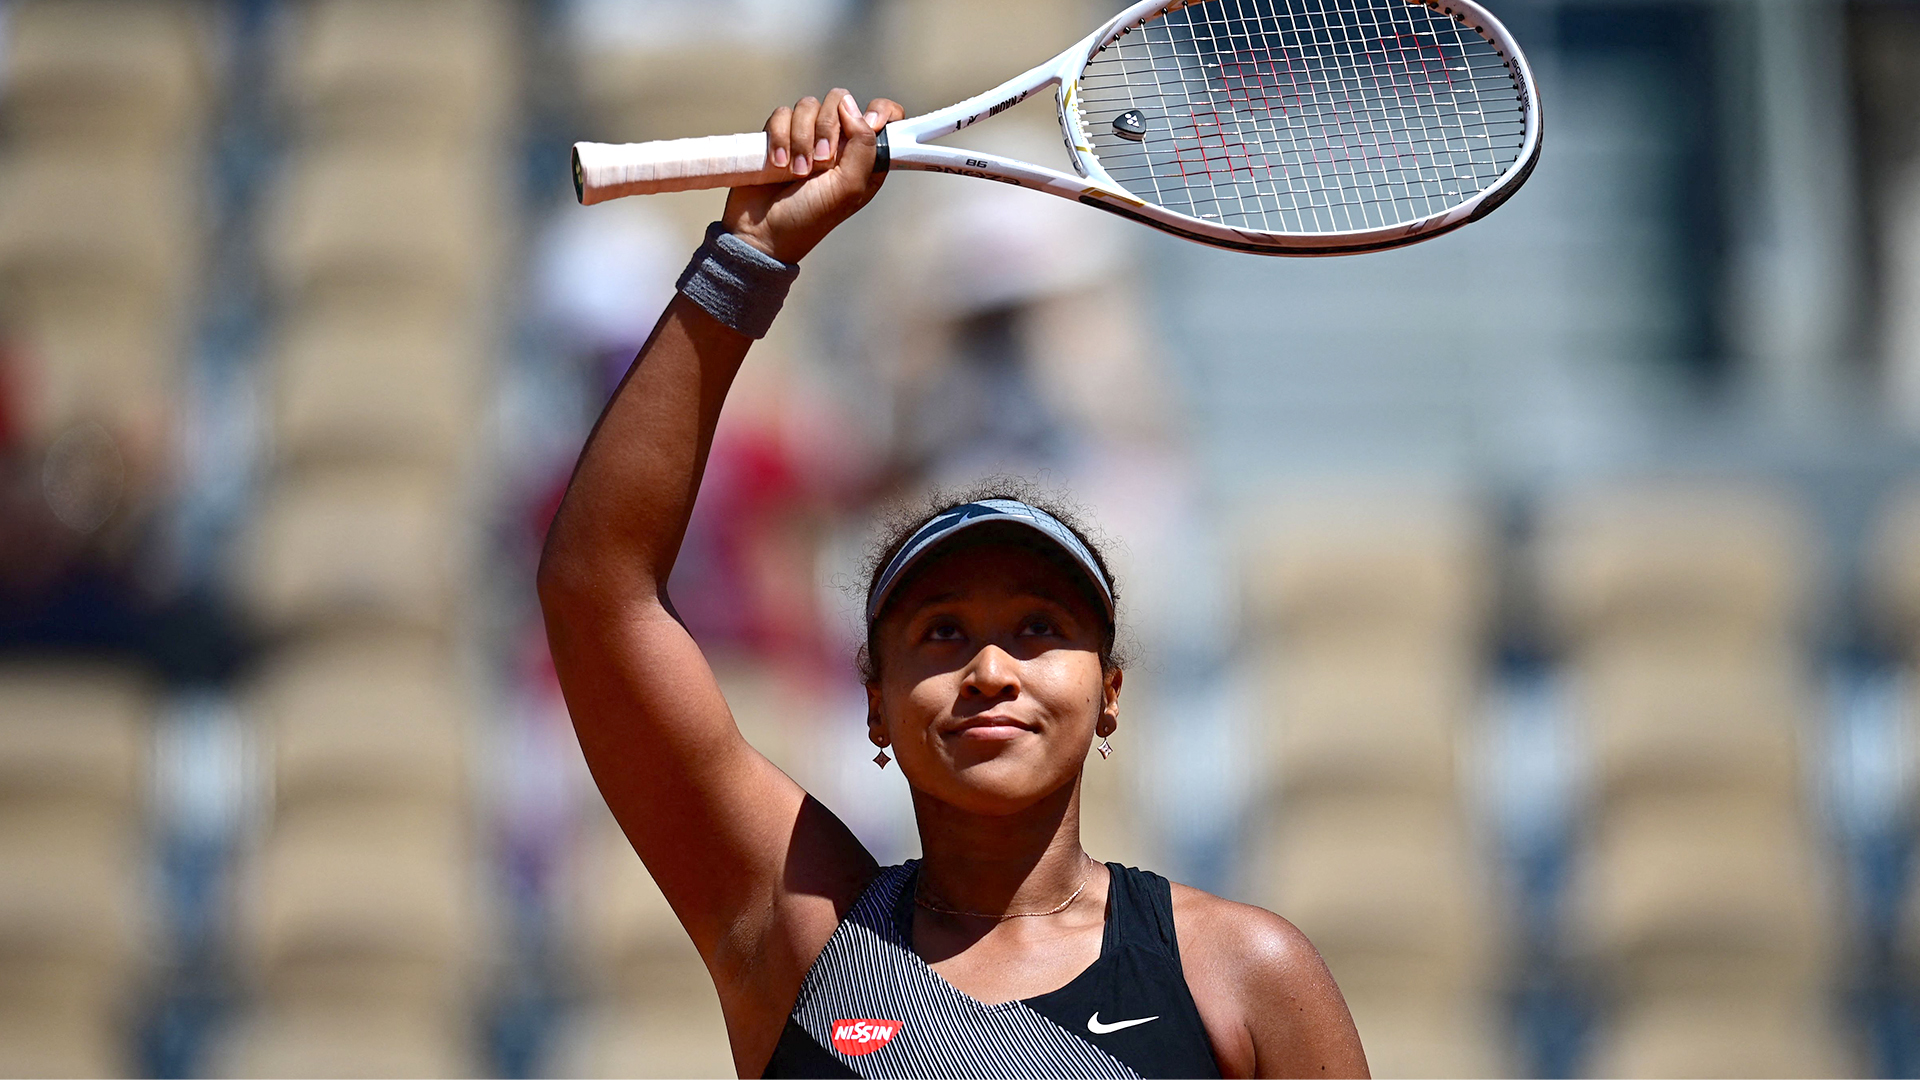 Naomi Osaka Slammed Her Own Records From 2020 And Made More Money Off The Court Than On It